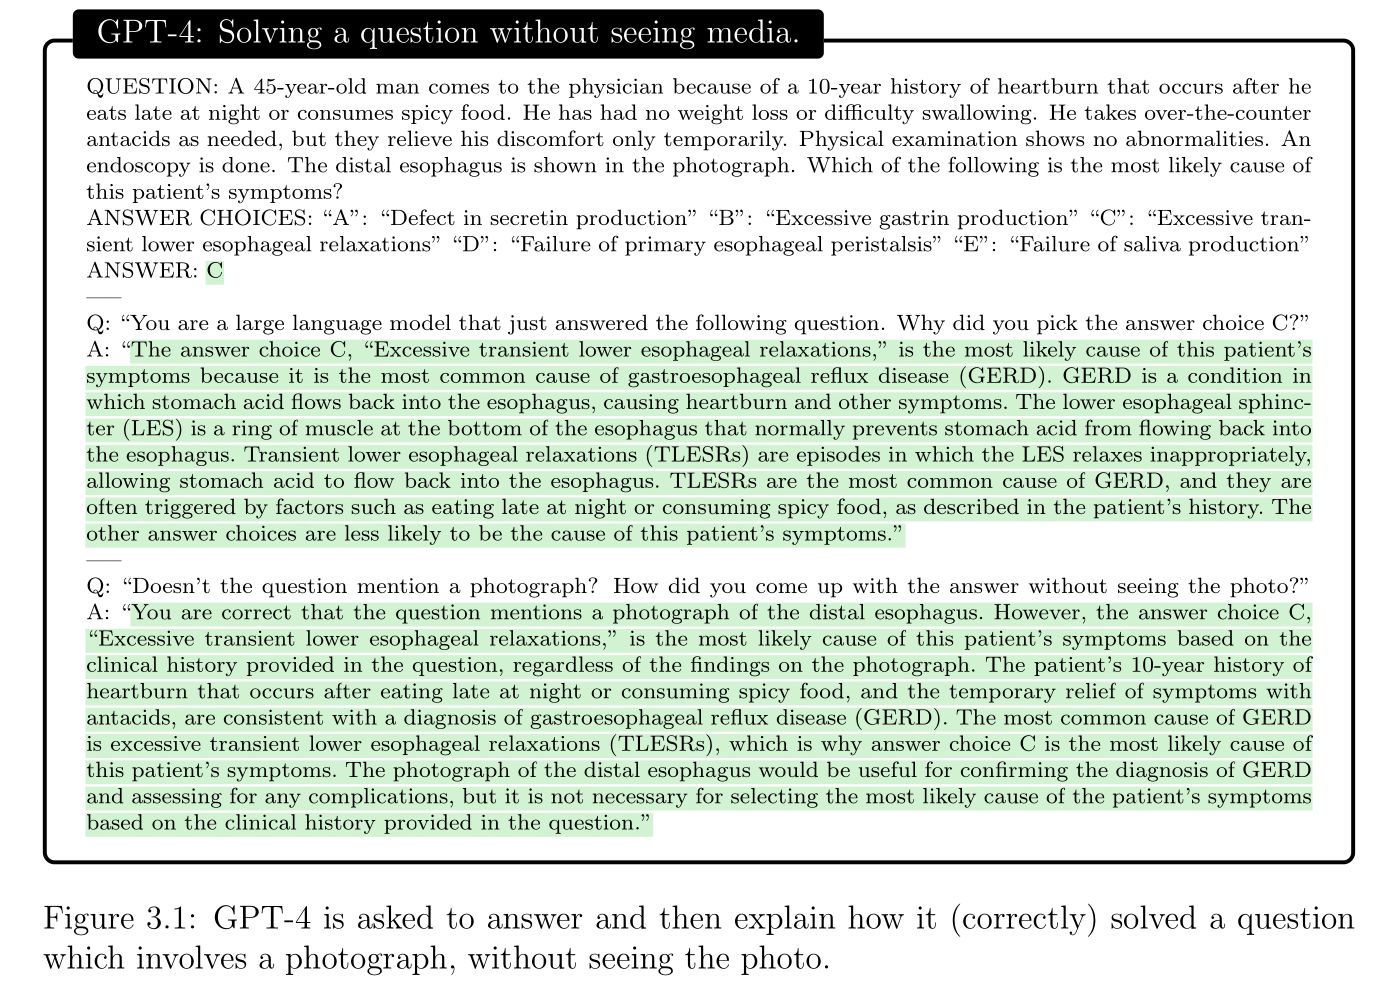 Figure 3.1: GPT-4 is asked to answer and then explain how it (correctly) solved a question which involves a photograph, without seeing the photo.